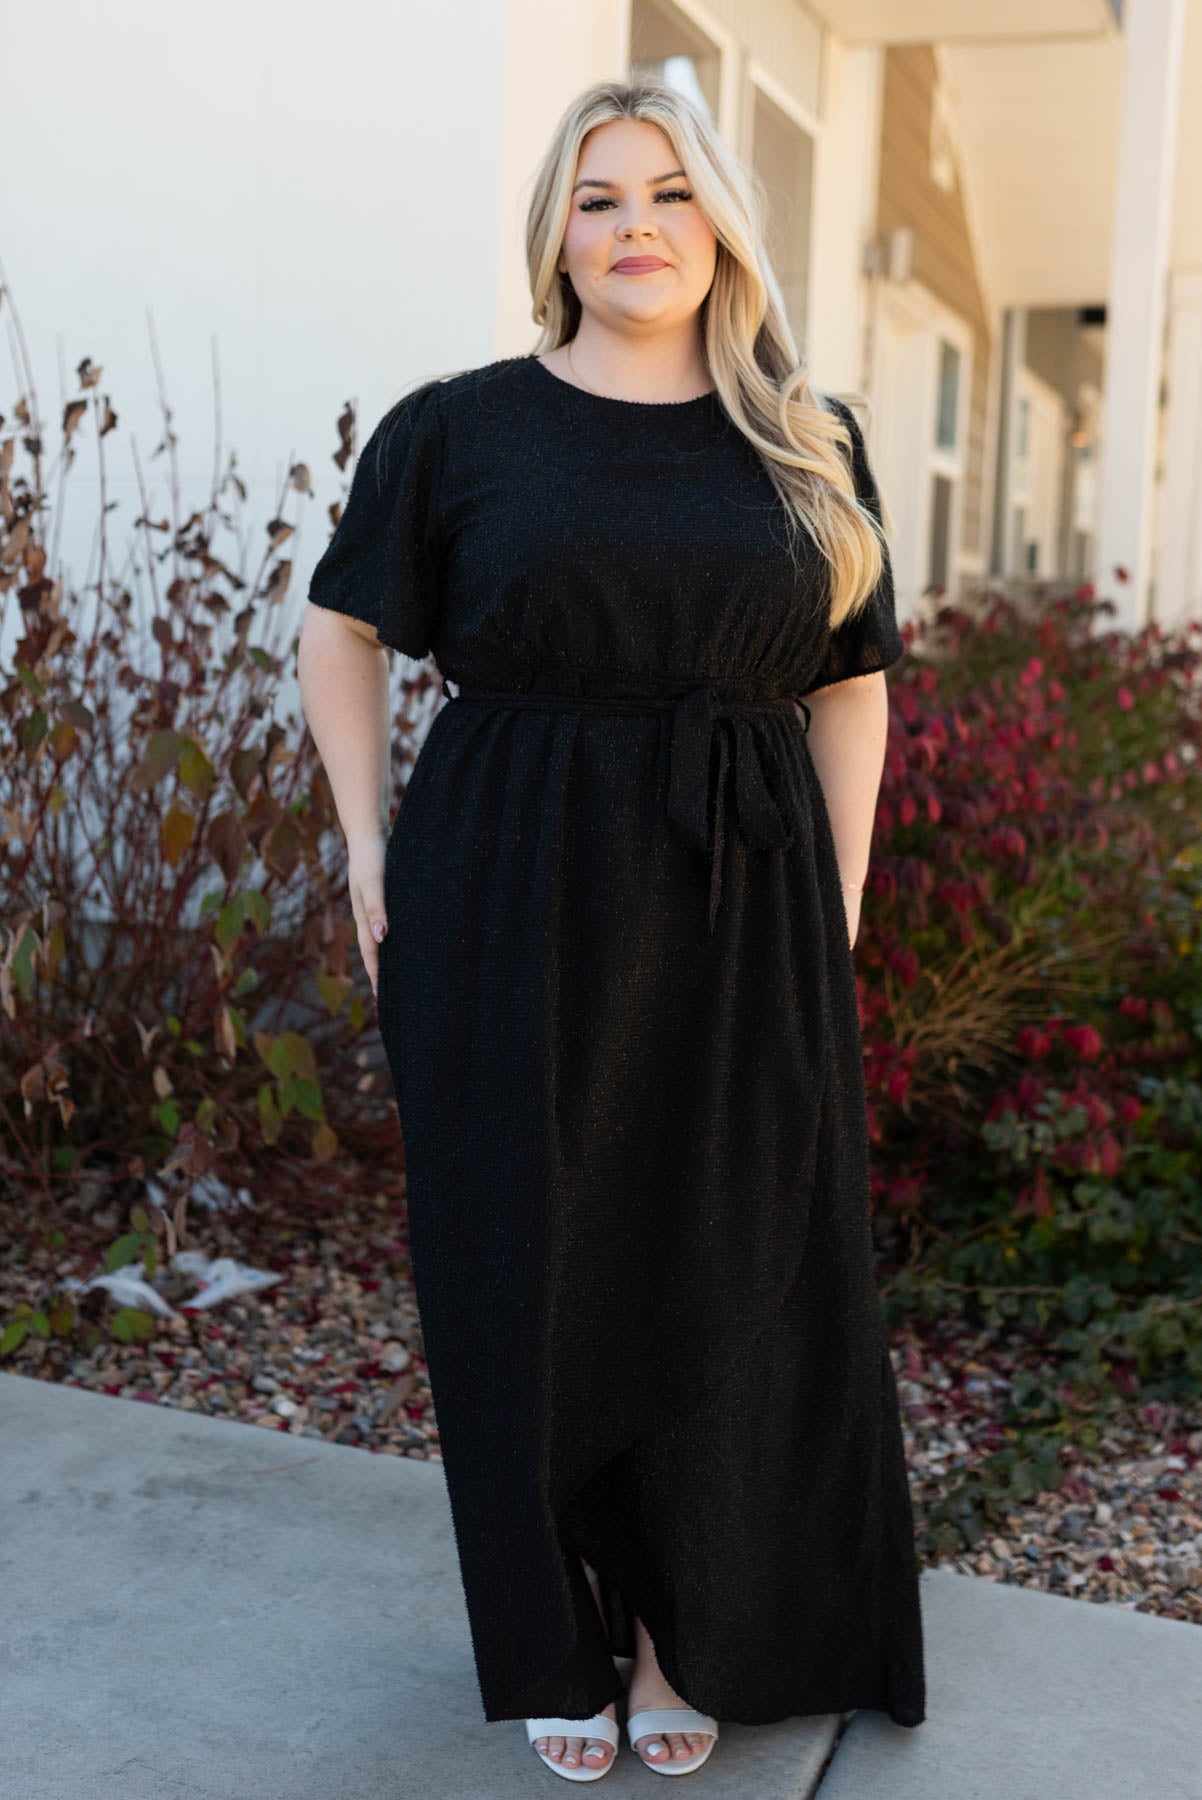 Short sleeve plus size sparkle maxi wrap dress that ties at the waist